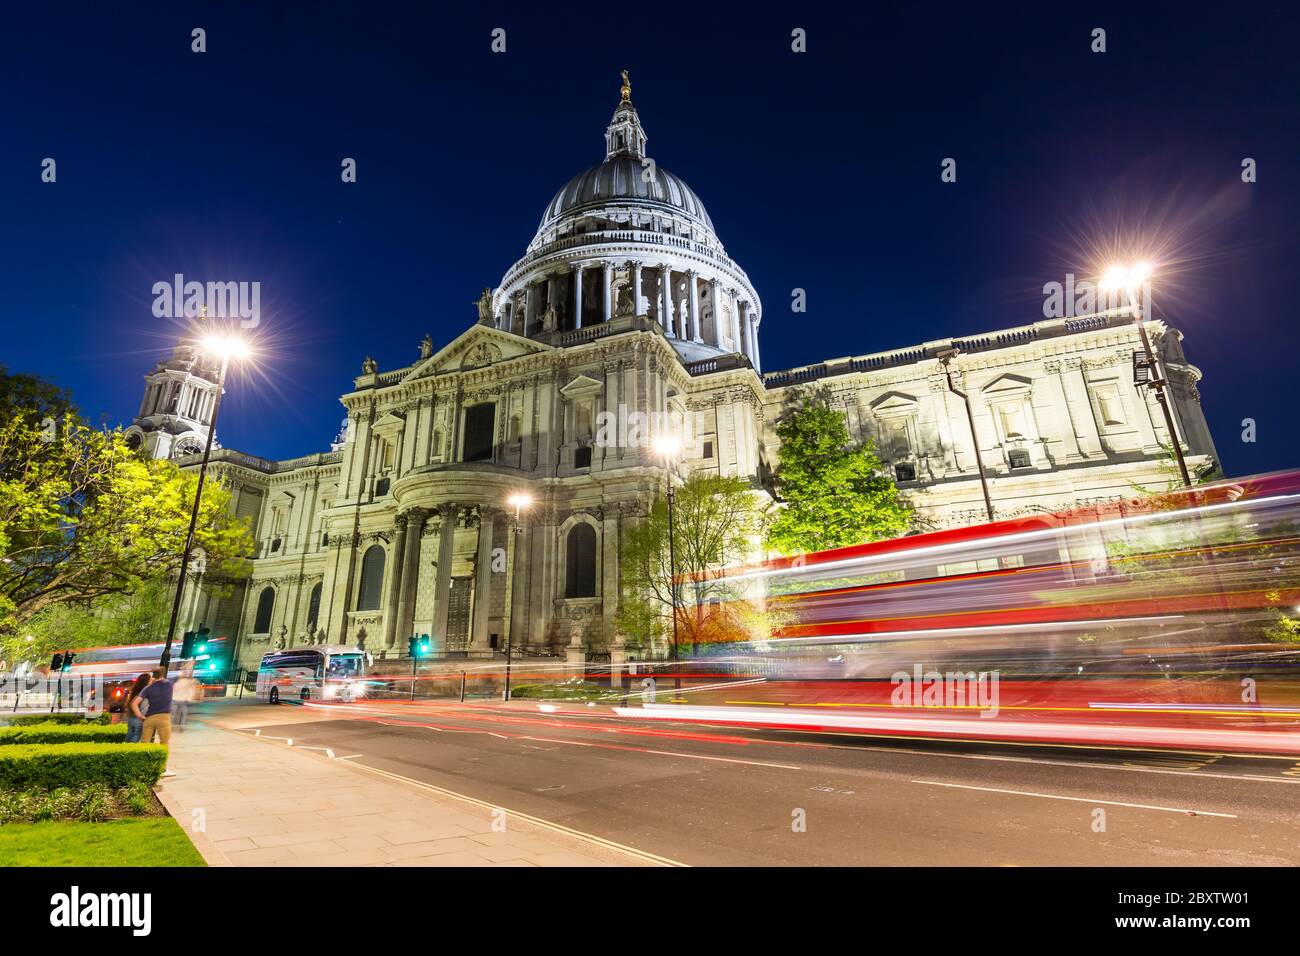 St. Paul's Cathedral in London at night Stock Photo